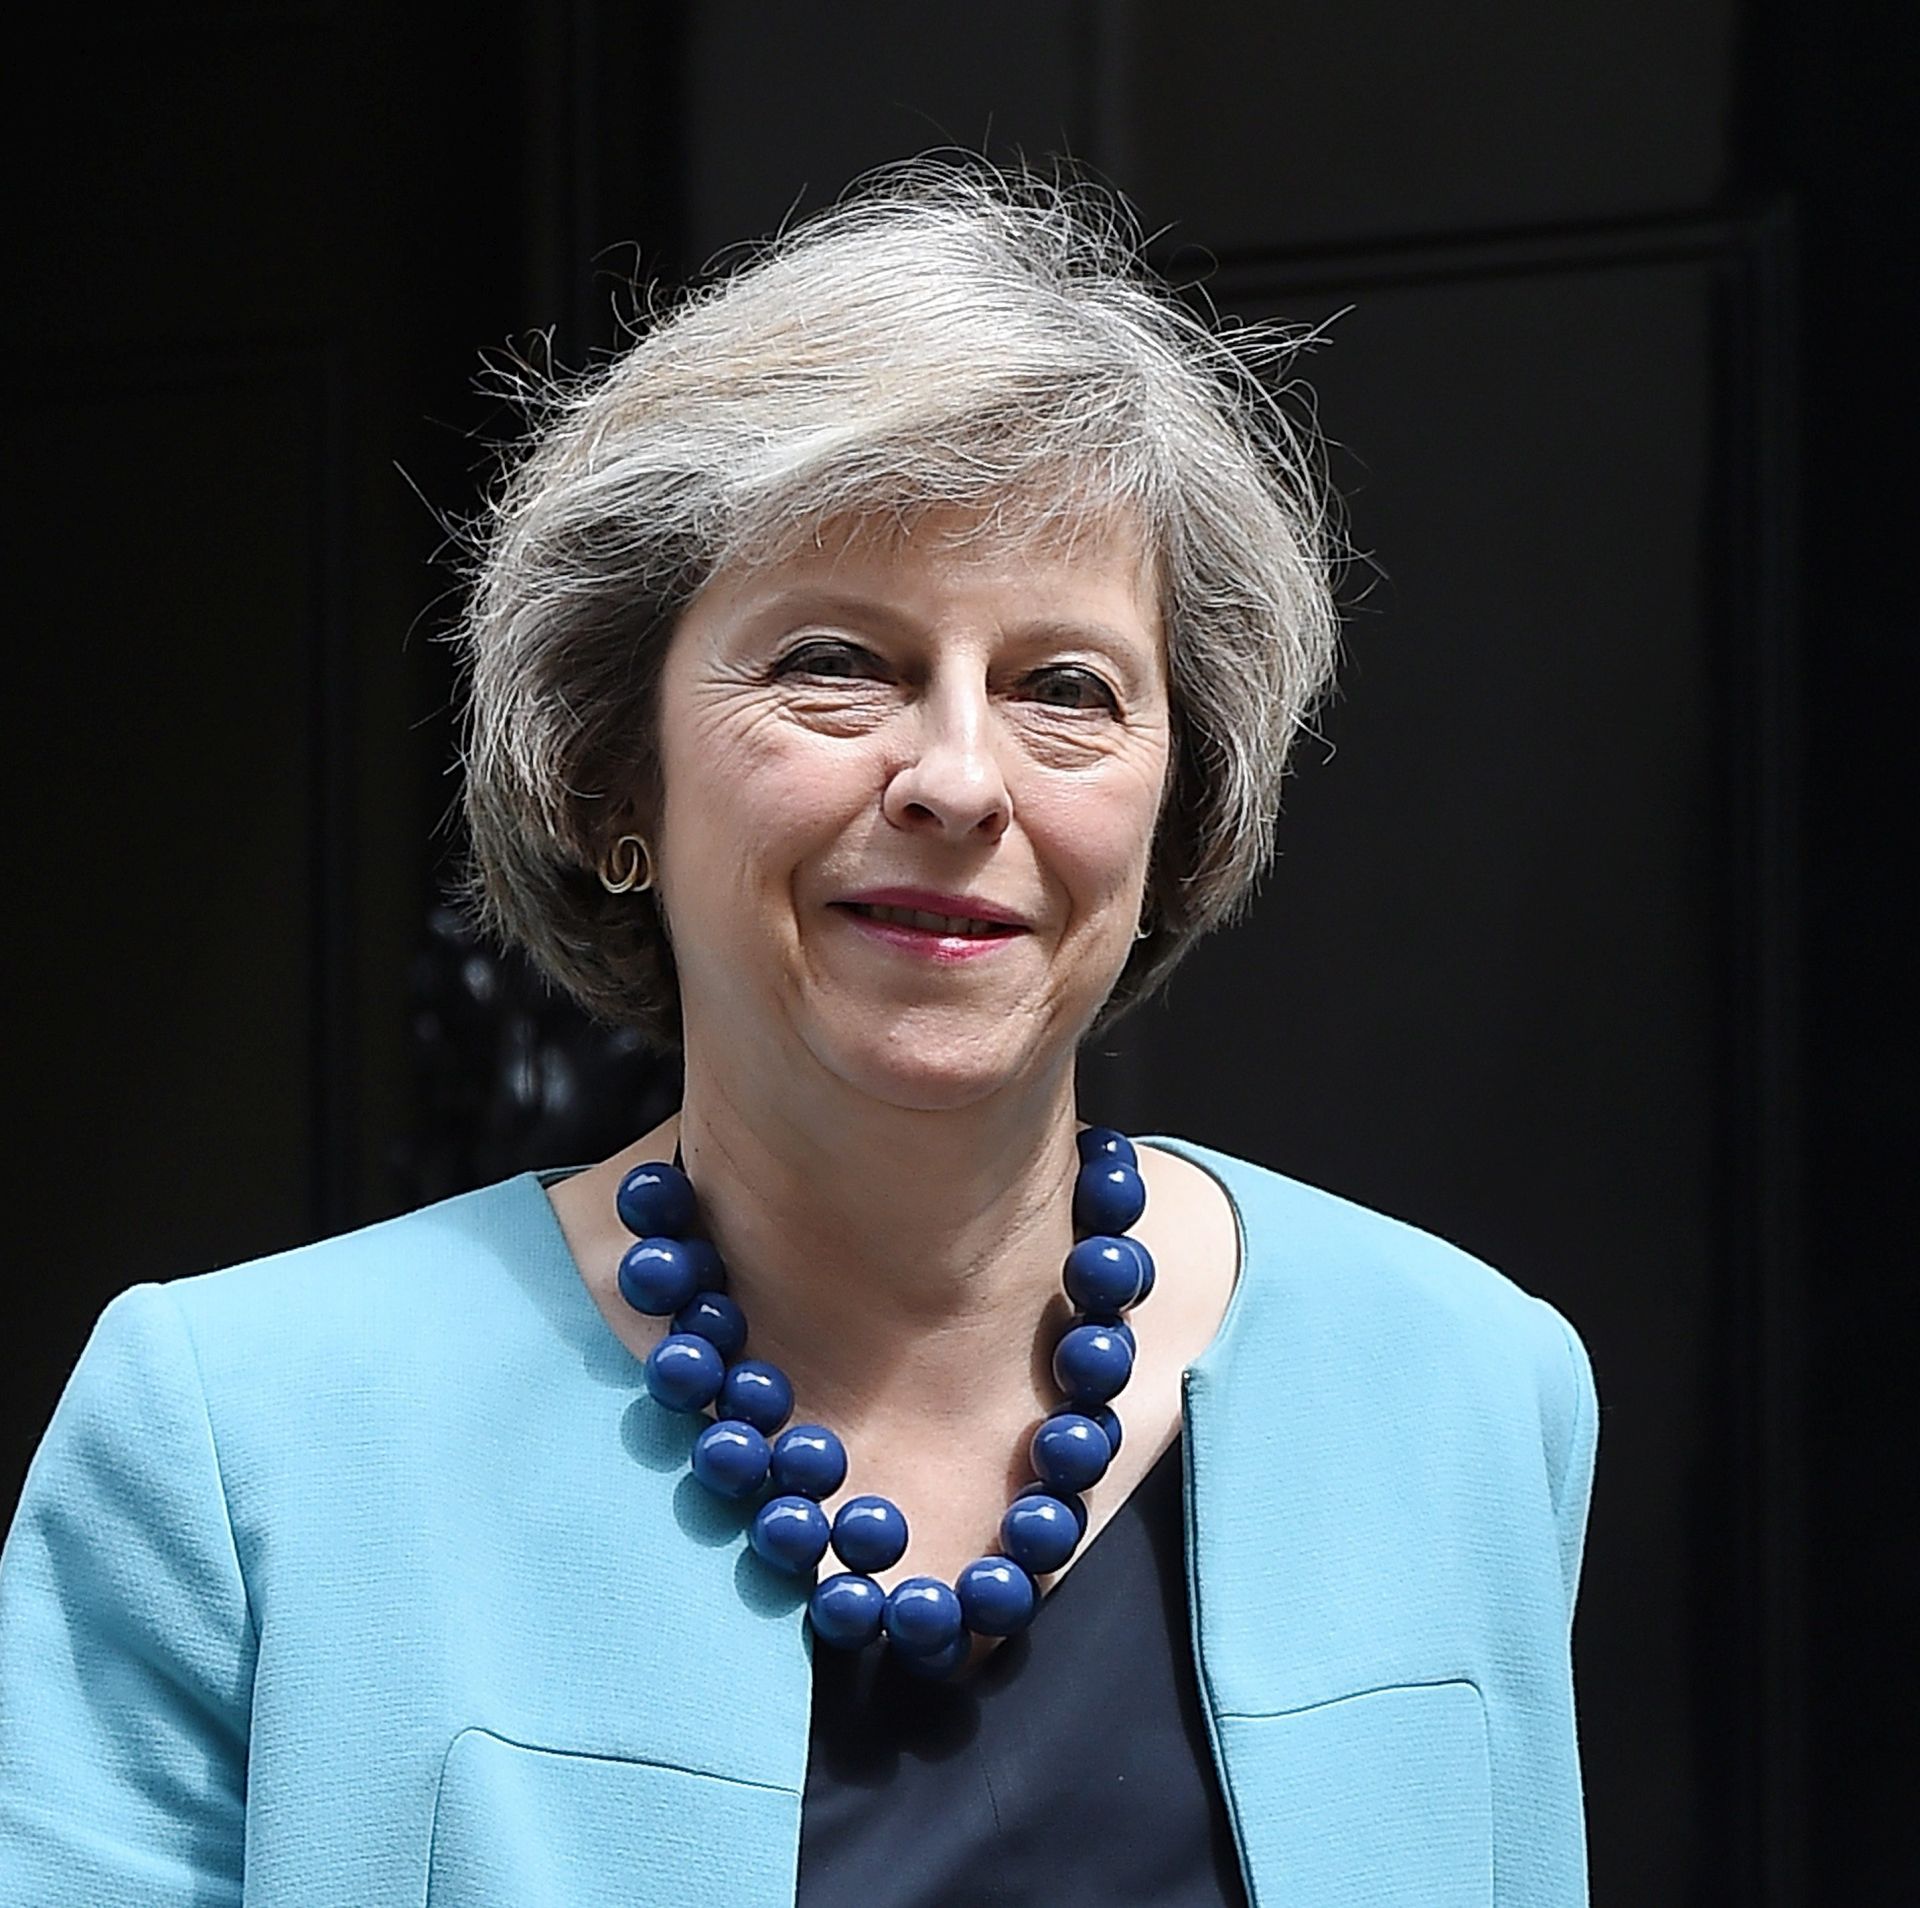 epa05398405 (FILE) A file photograph showing Britain's Secretary of State for the Home Department Theresa May leaves after a cabinet meeting at Downing Street in London, Britain, 27 June 2016. Media reports on 30 June 2016 that Theresa May is to run in the Conservative Party leadership contest with the winner to be announced on 09 September 2016.  EPA/ANDY RAIN